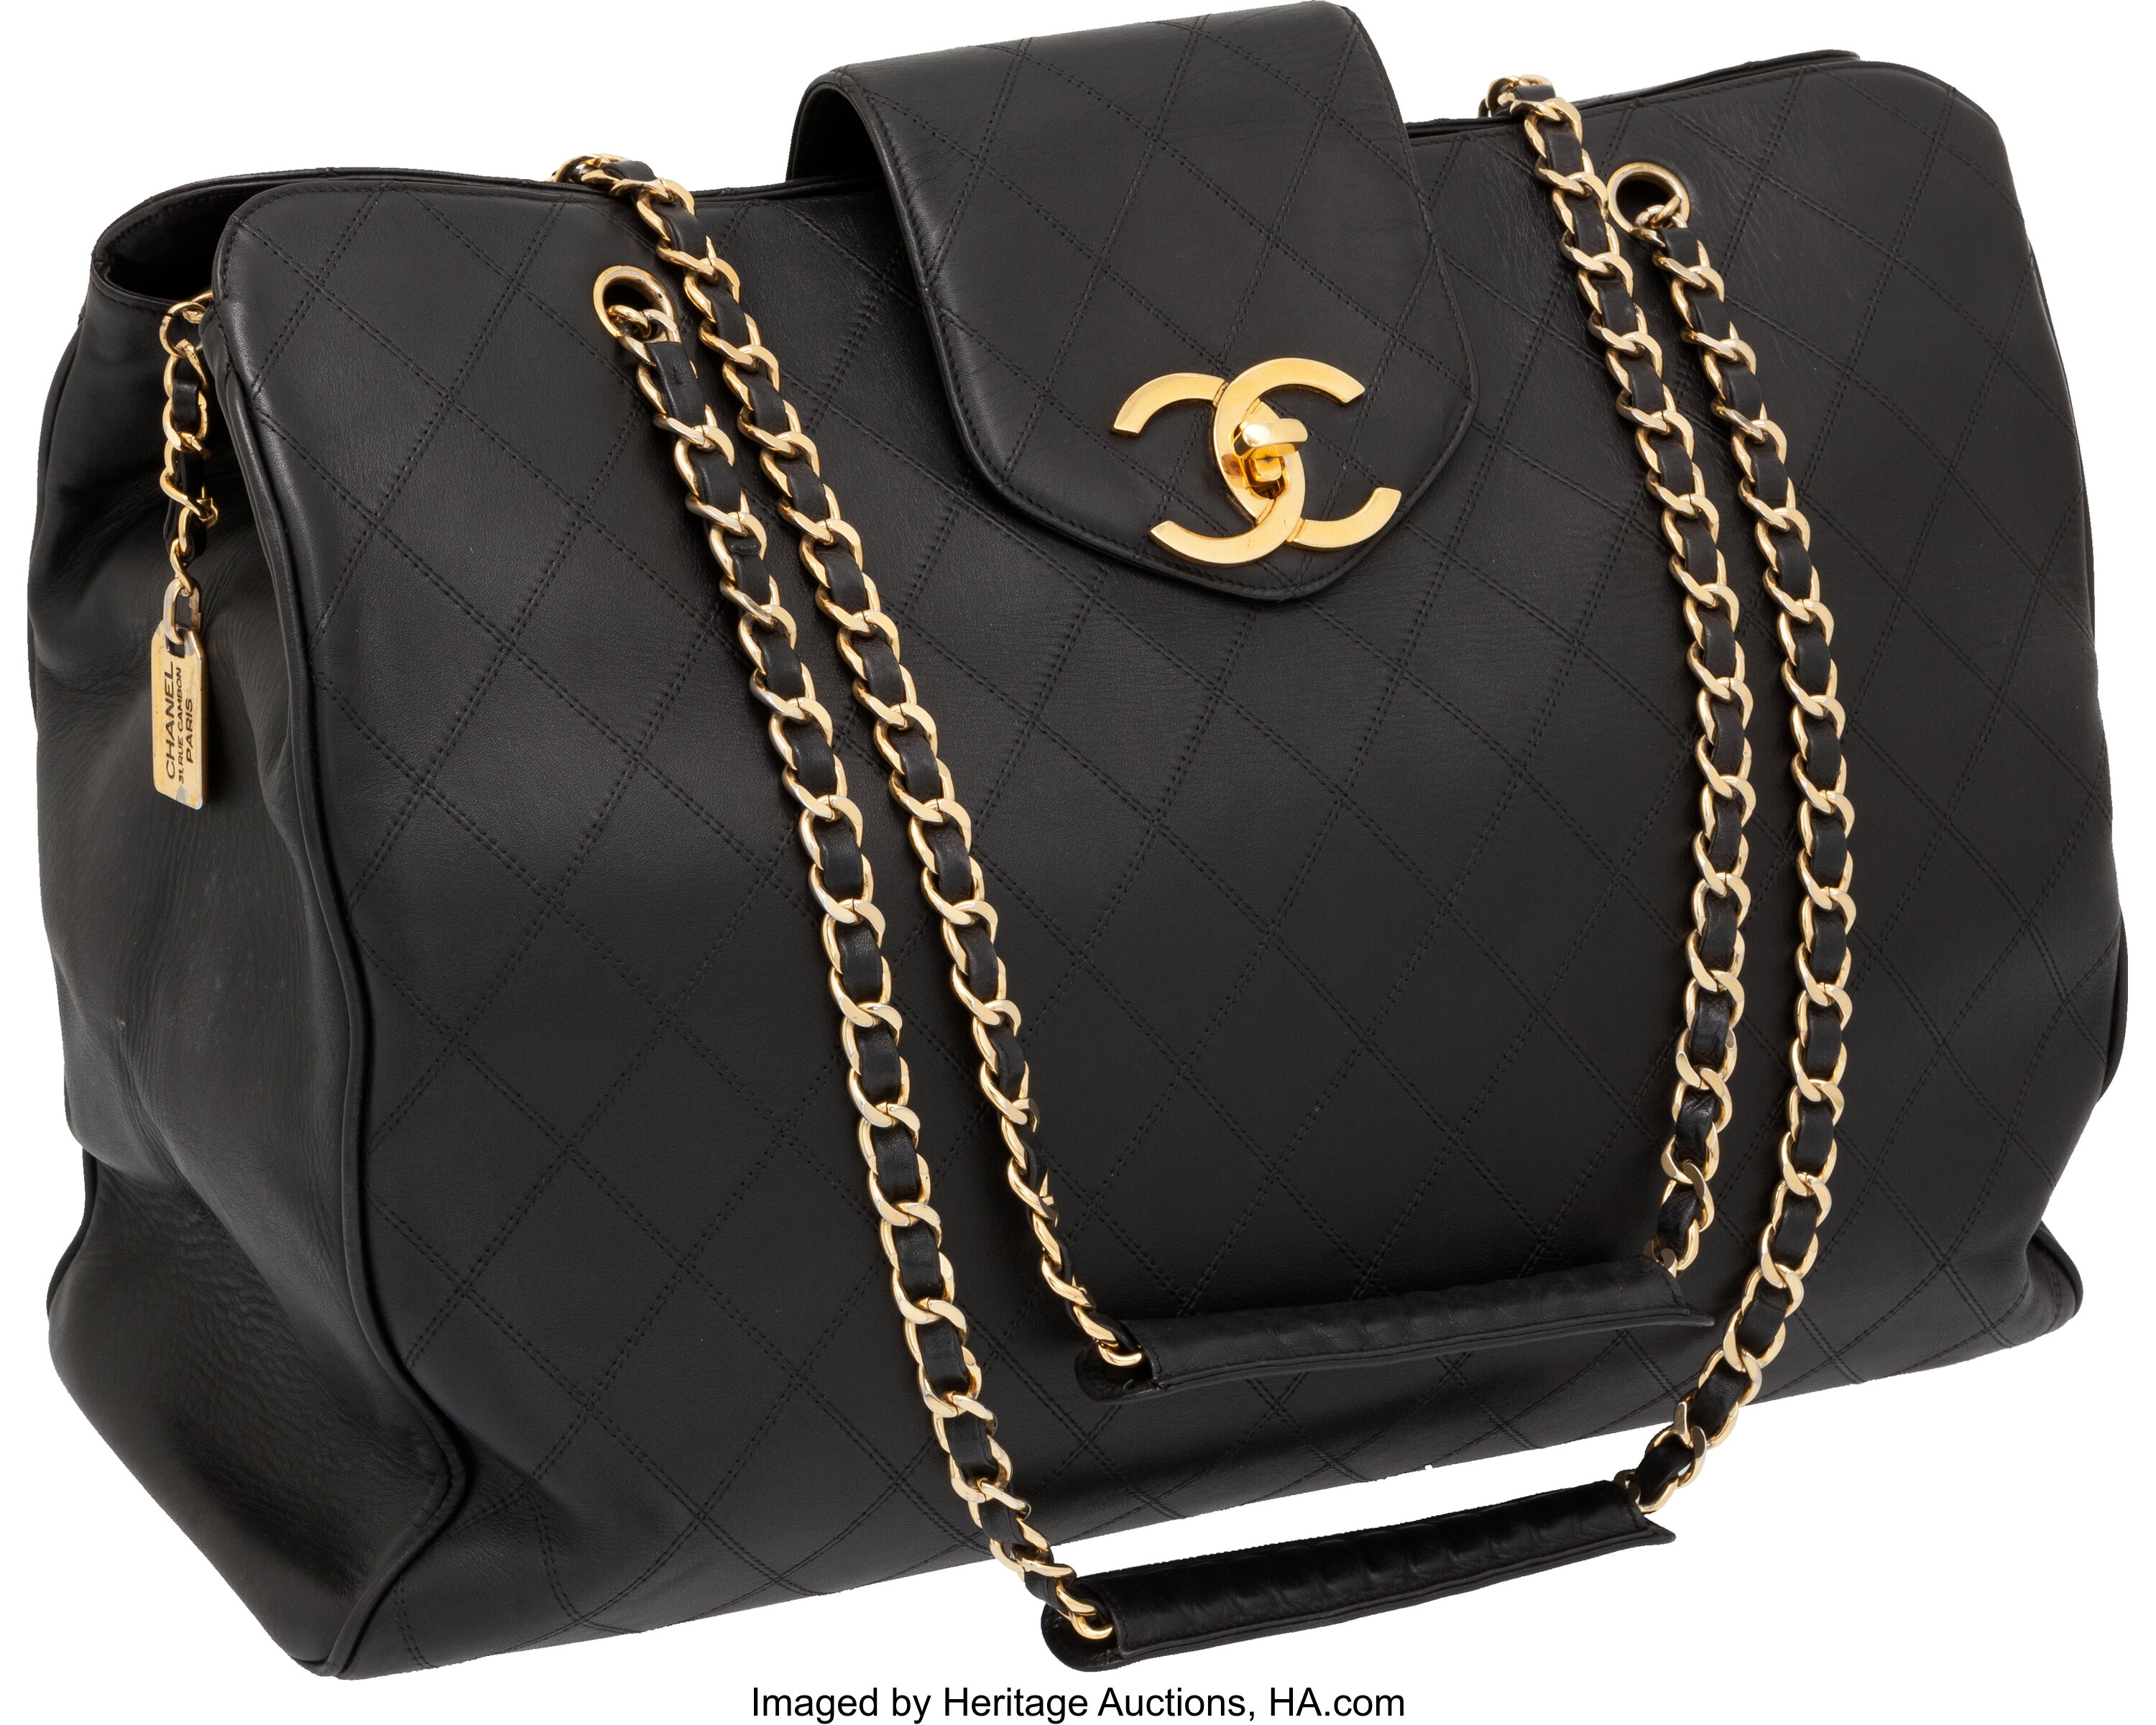 Chanel Black Lambskin Leather Supermodel Jumbo Tote with Gold | Lot #56212  | Heritage Auctions